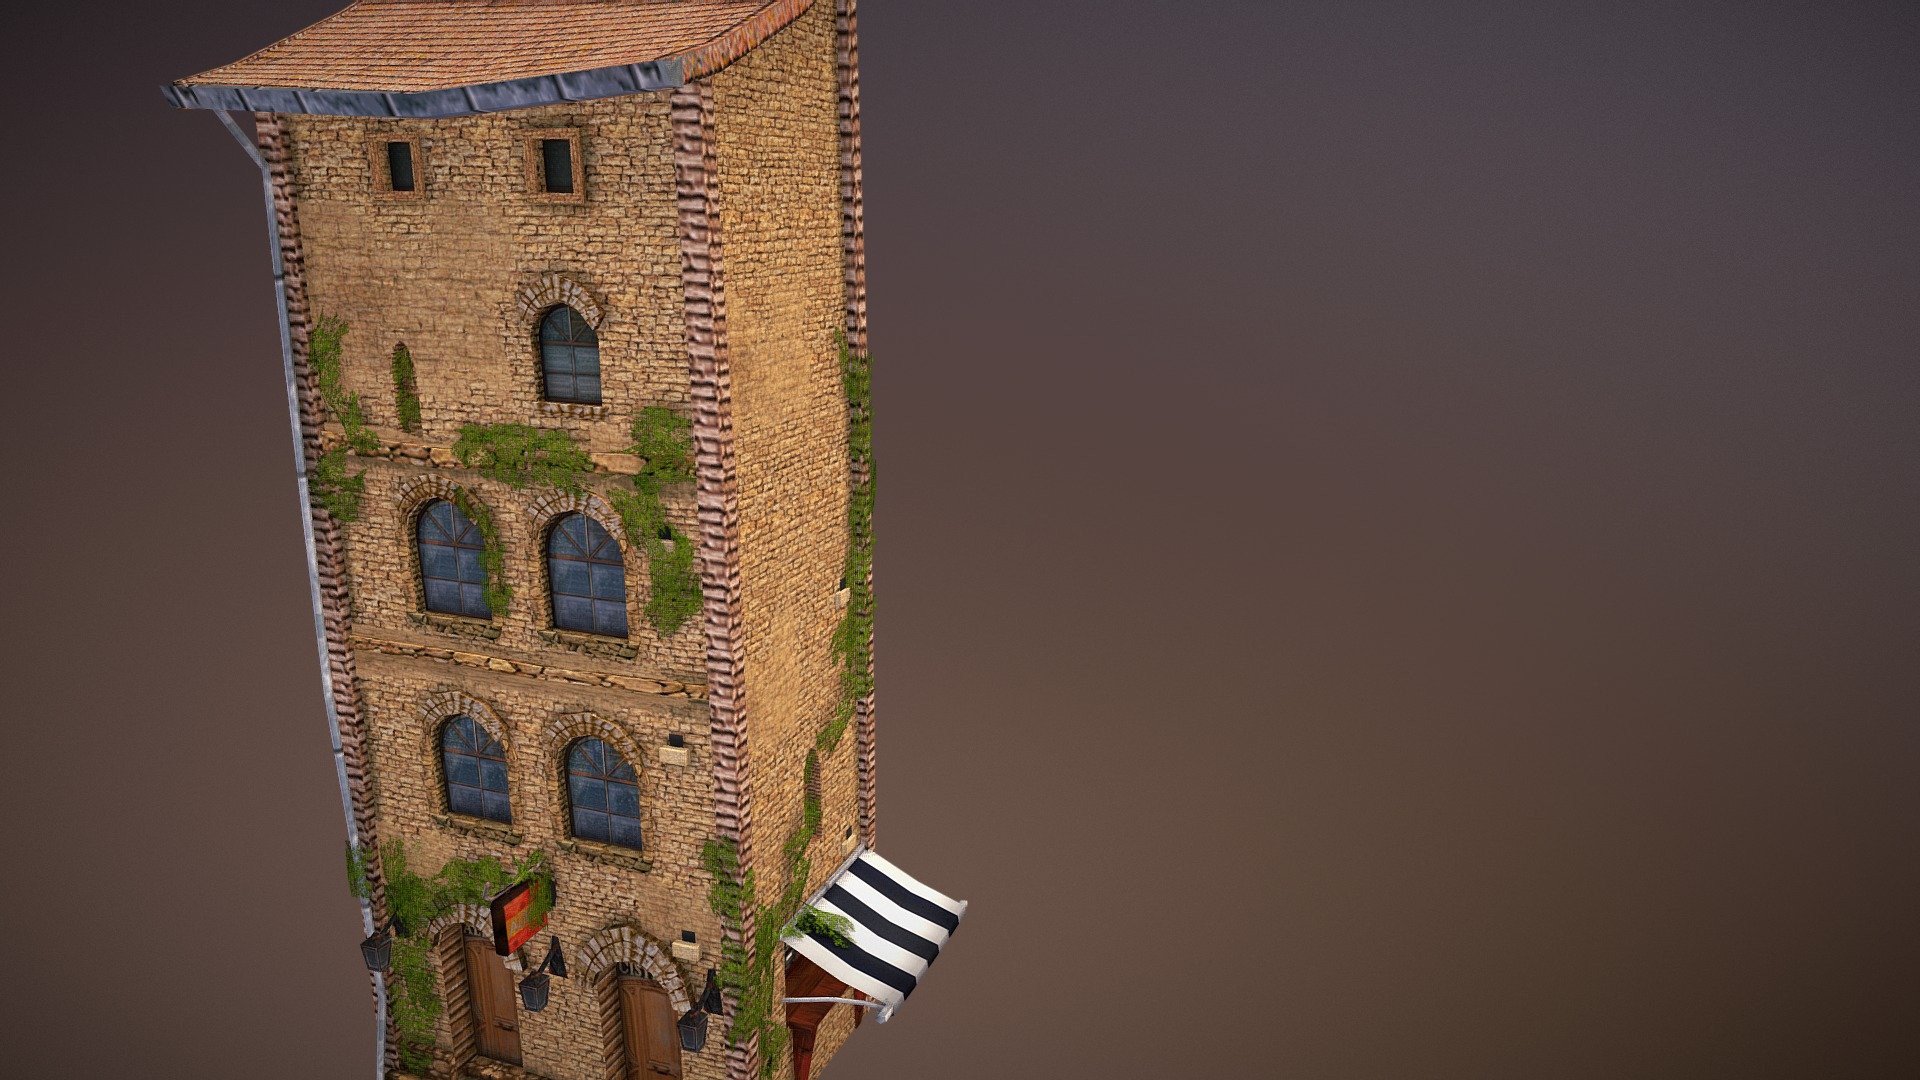 This house is the first finished house for the later coming cityscene. I picked San Gimignano for my scene 3d model